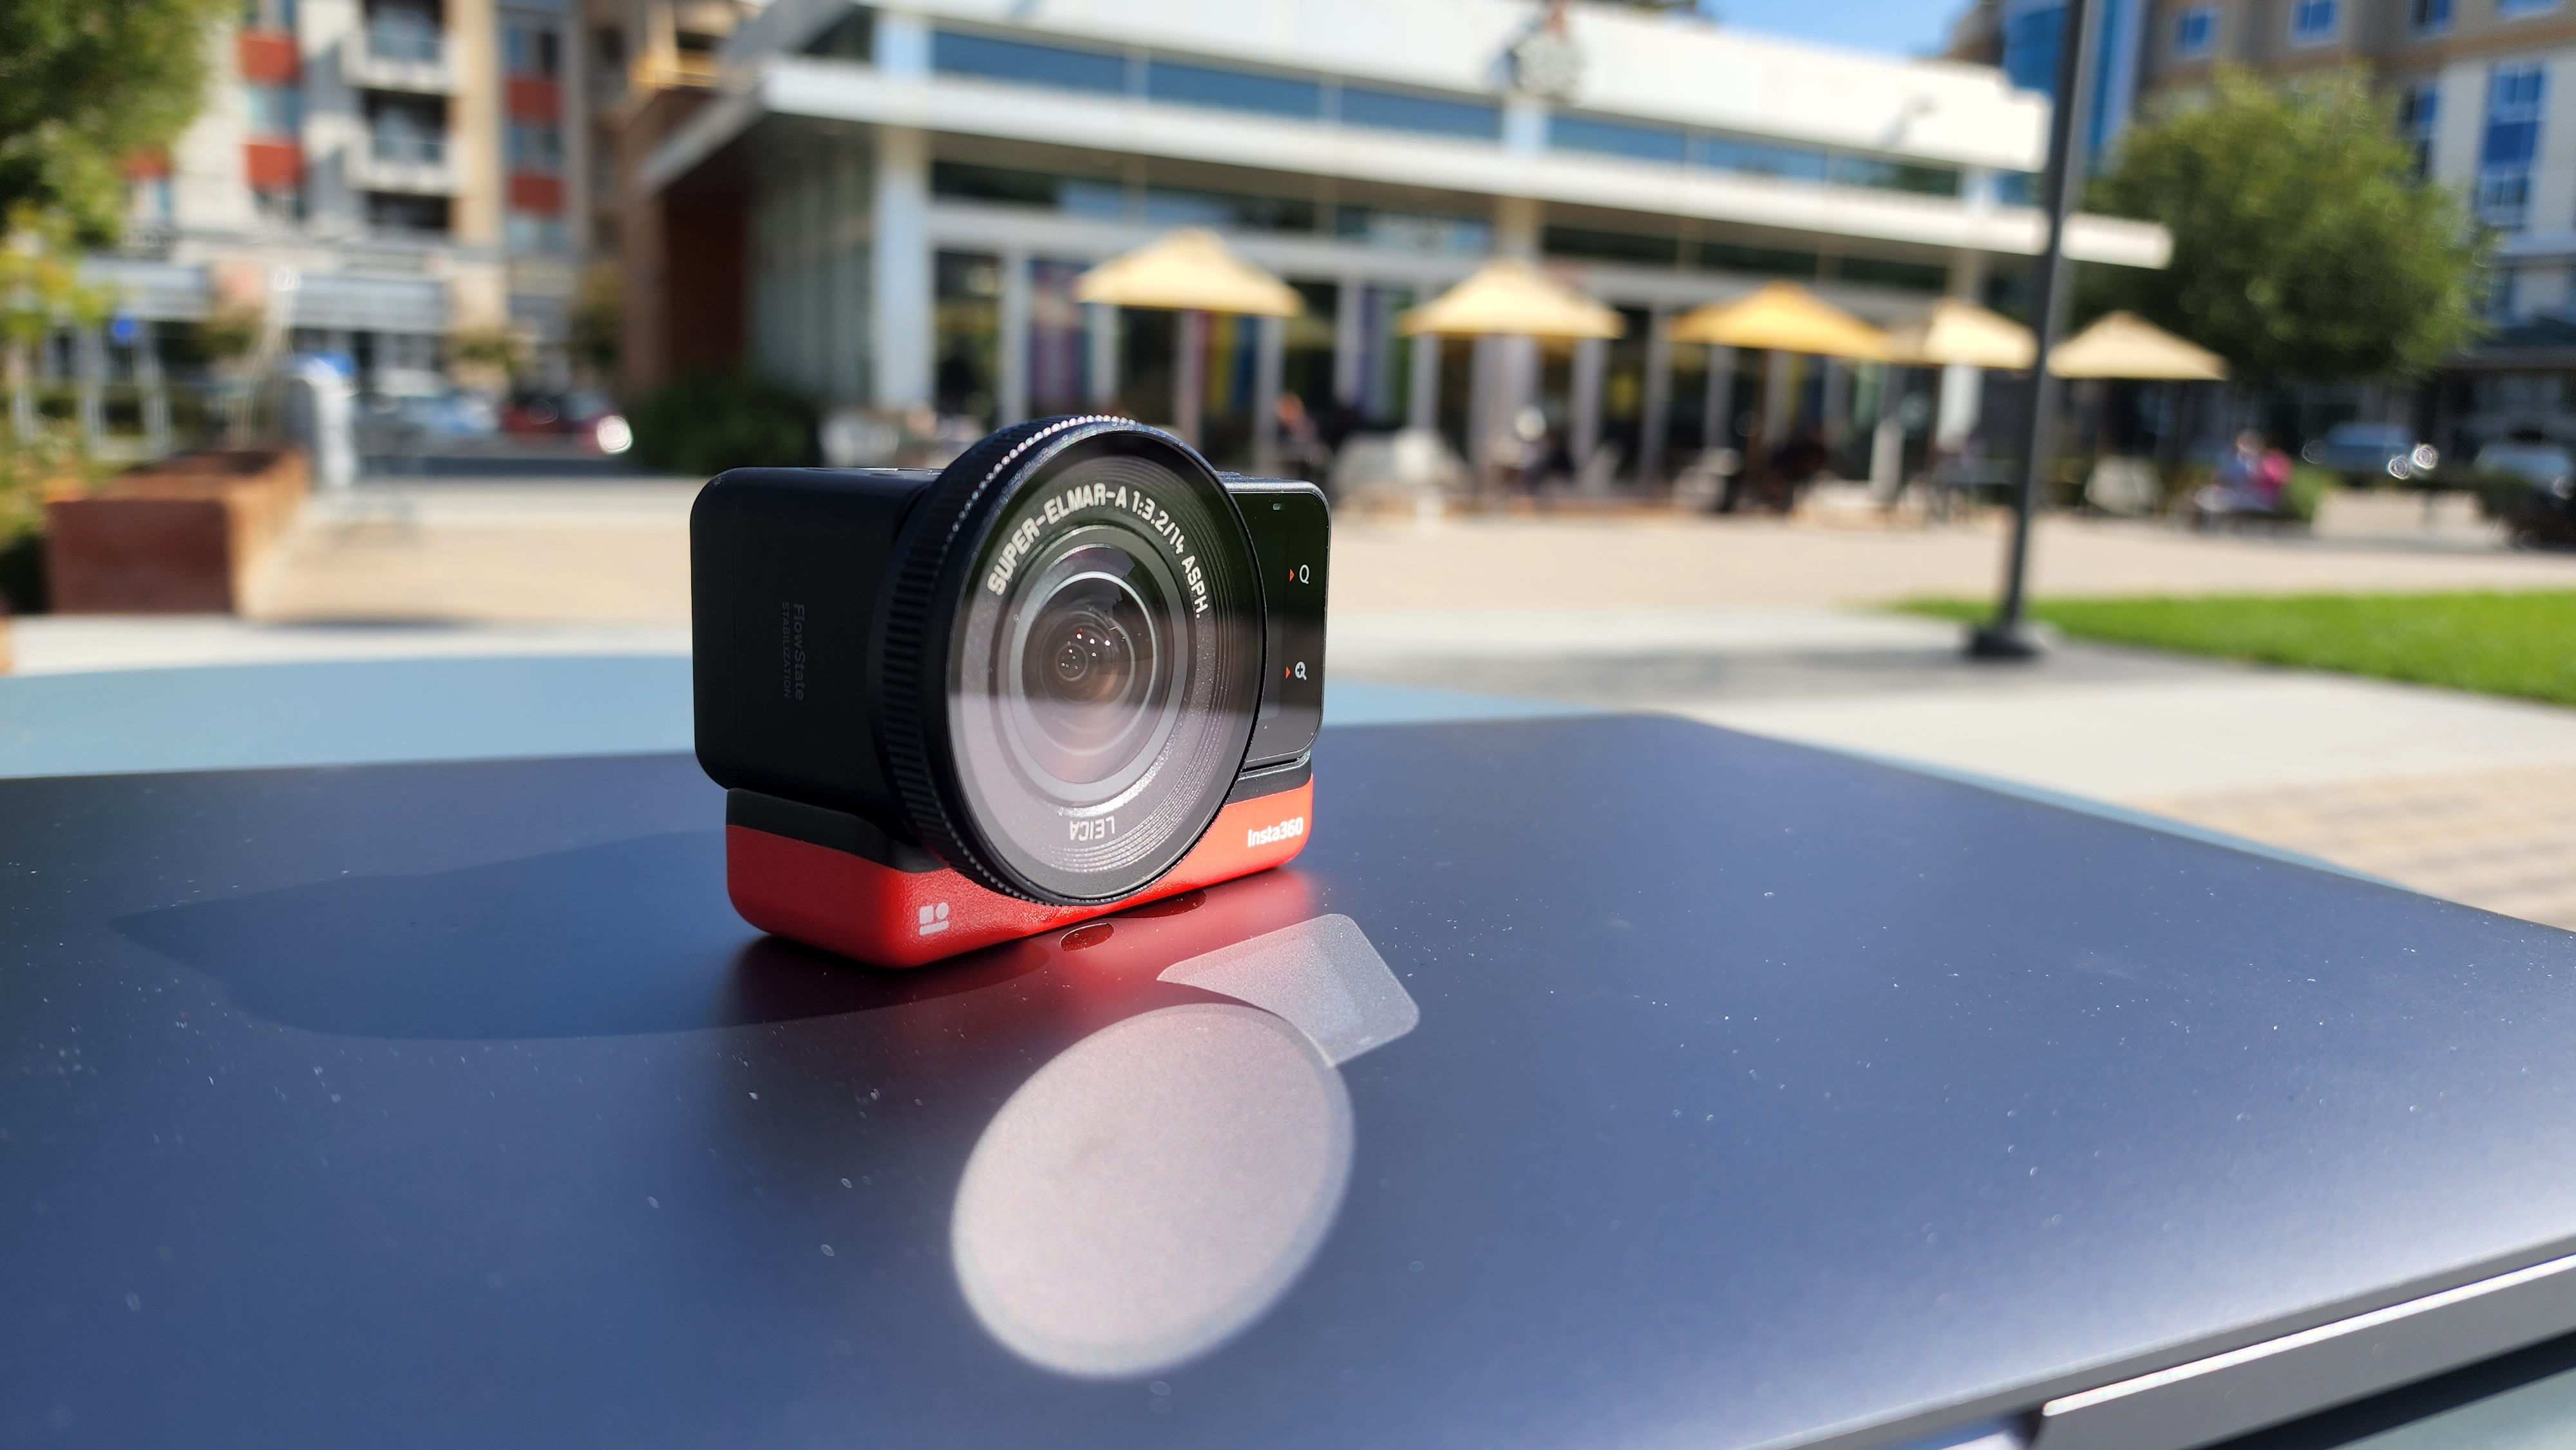 Insta360 ONE RS 1-inch 360 Edition review